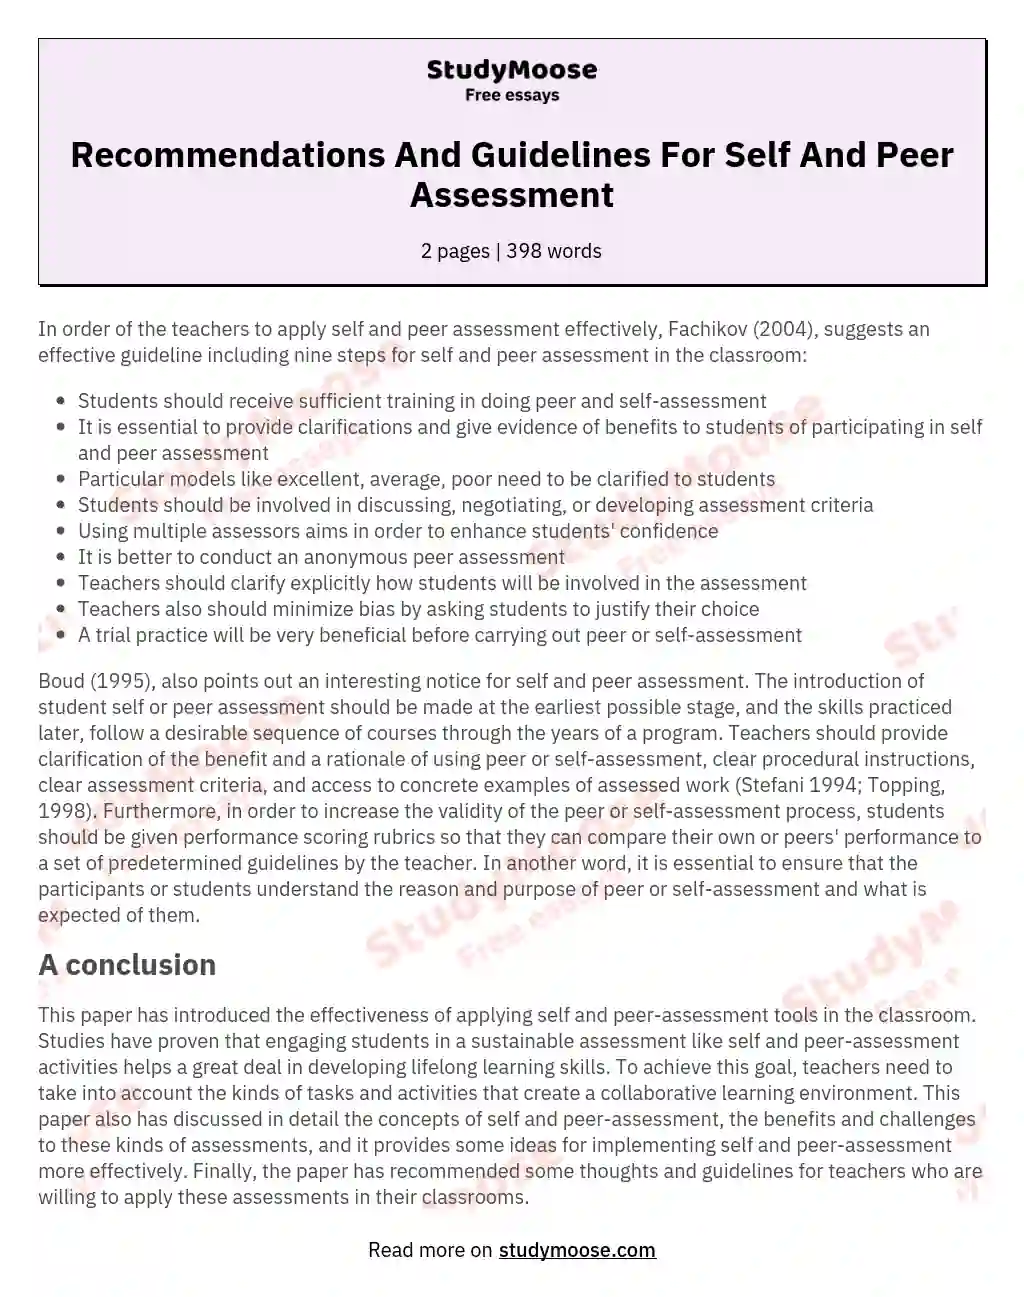 Recommendations And Guidelines For Self And Peer Assessment essay